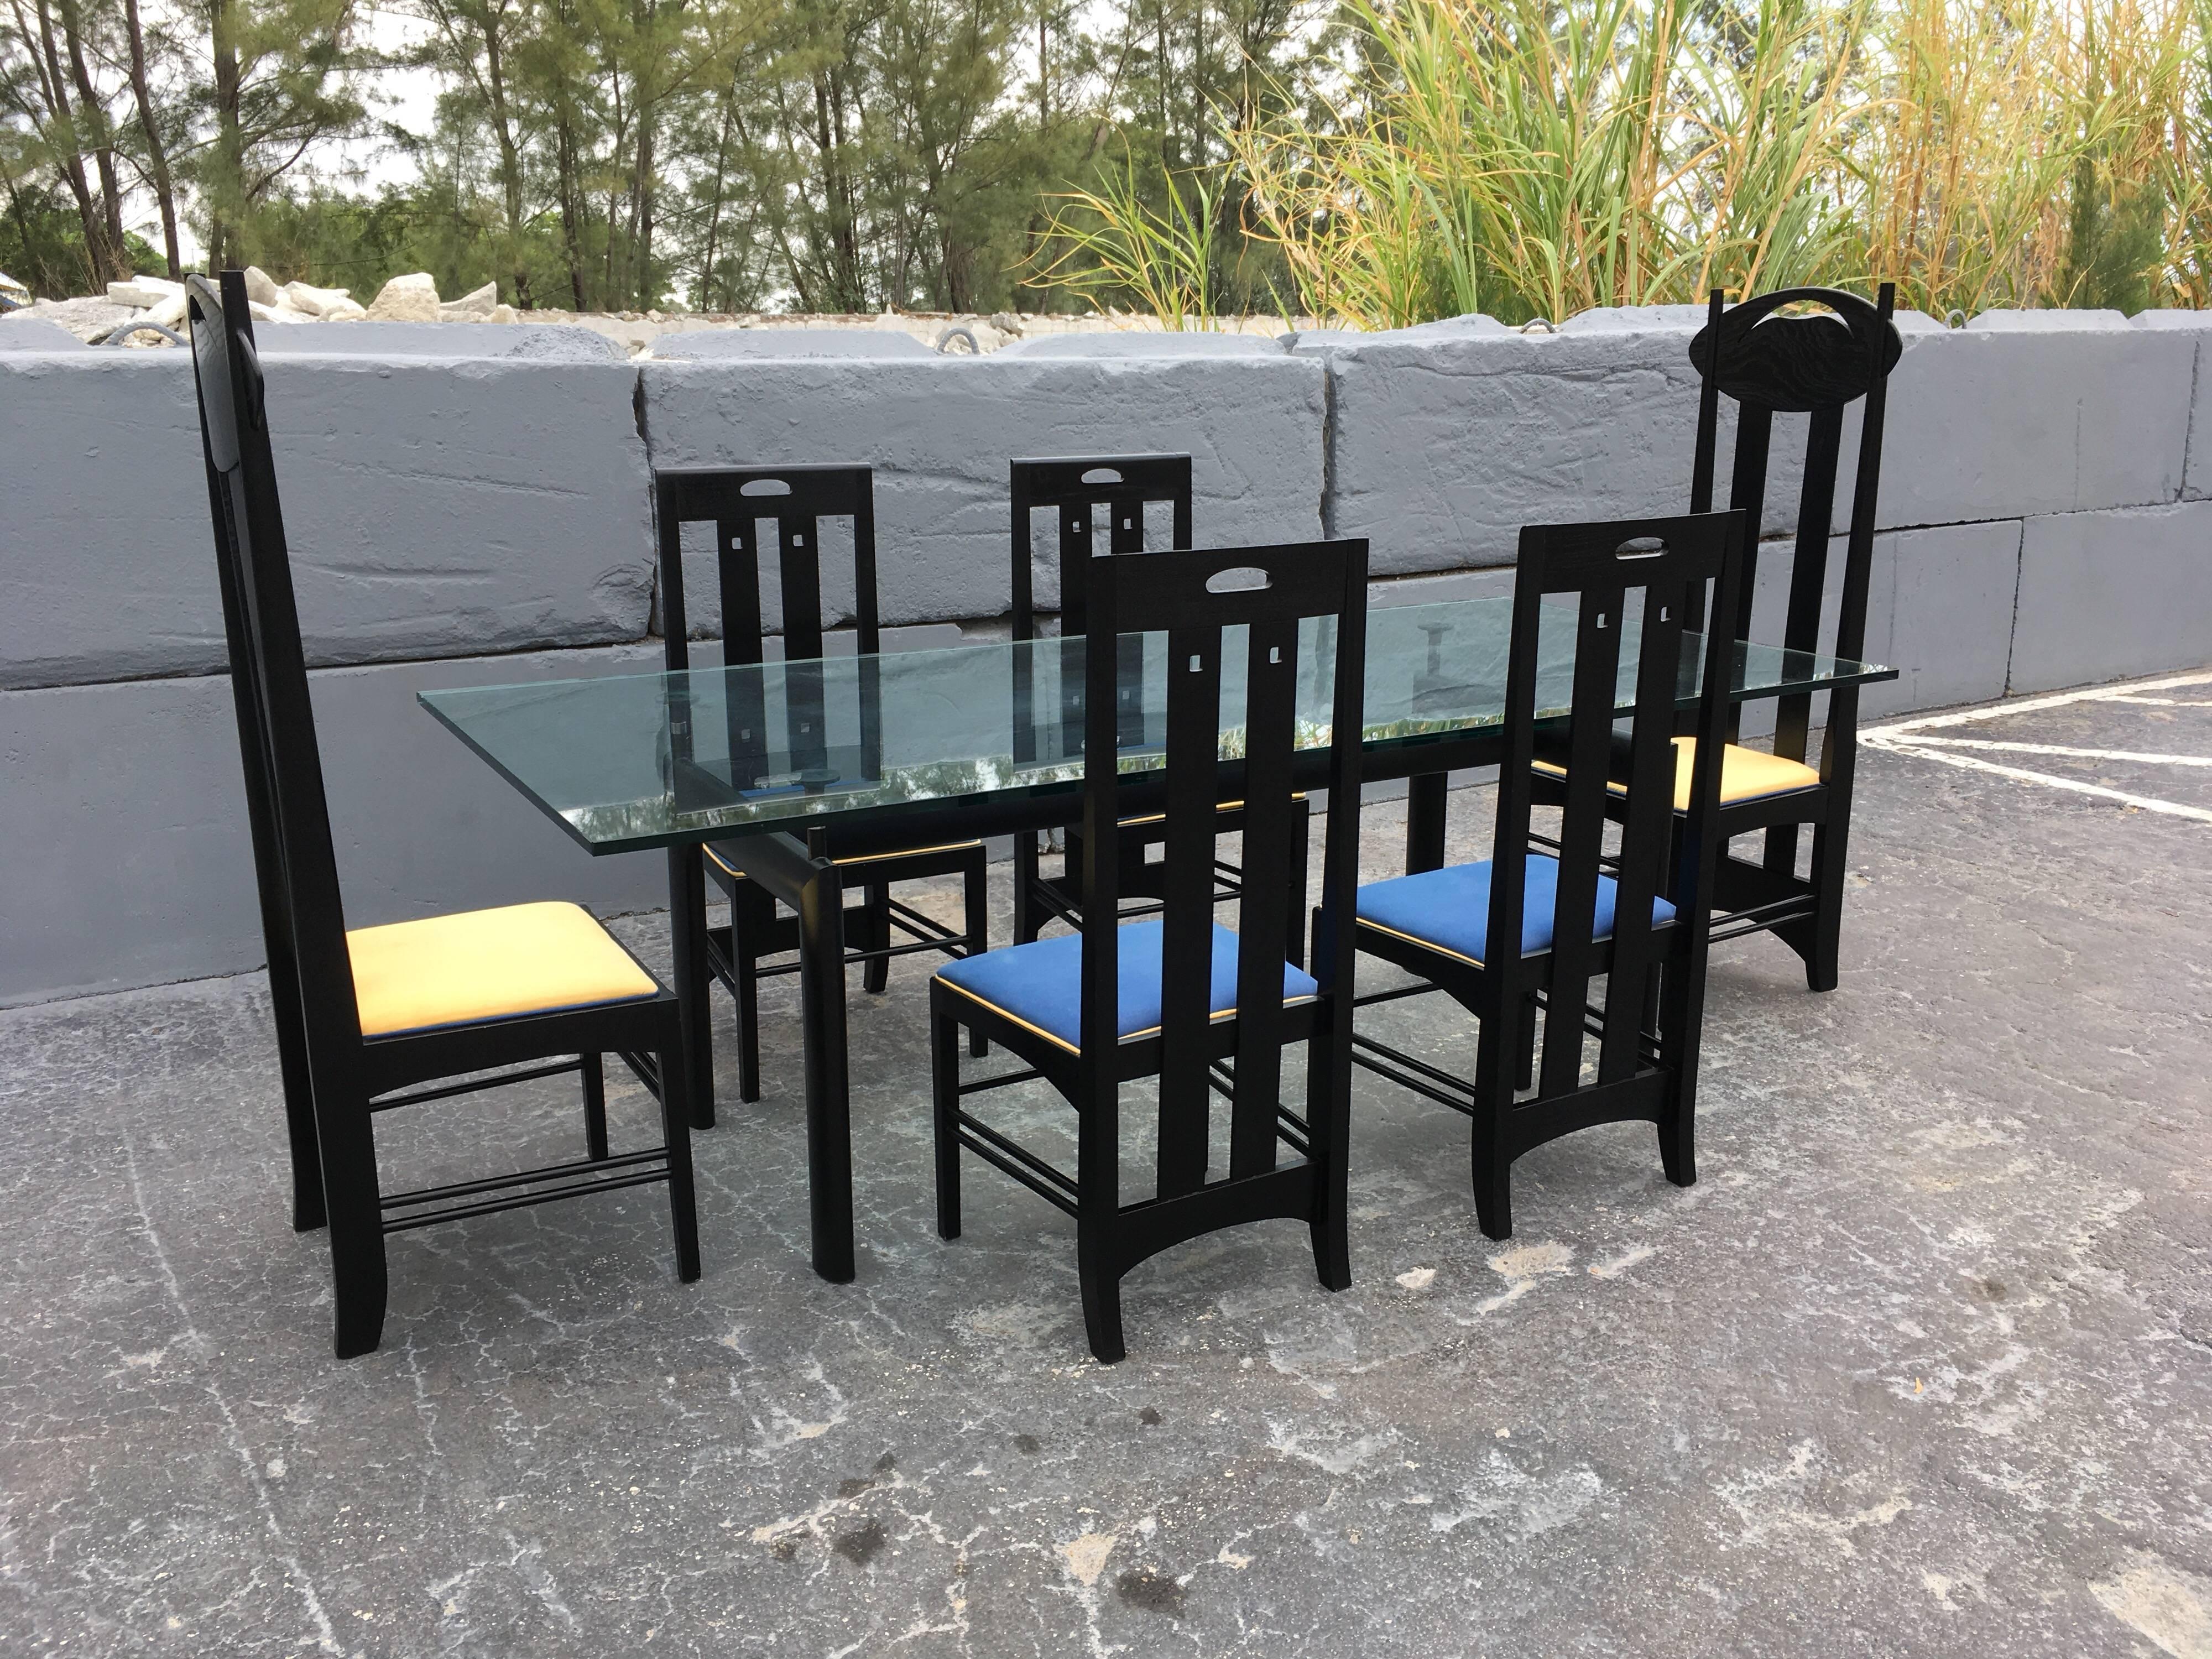 Six unsigned Charles Rennie Mackintosh chairs, four side chairs and two tall back chairs. The seats need to be reupholstered. Tall back chairs are 54